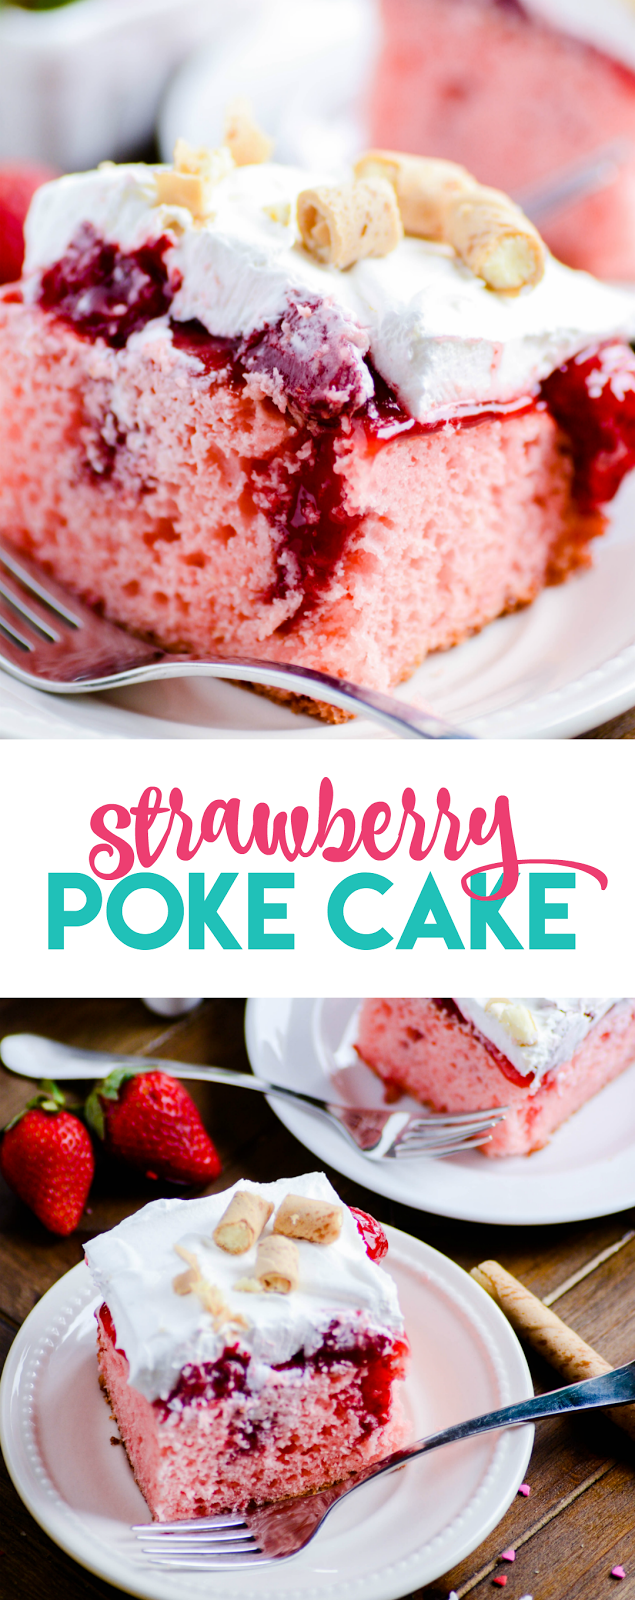 Strawberry Cake soaked in homemade strawberry sauce, spread with a whipped topping, and topped with white chocolate-filled pirouettes. 